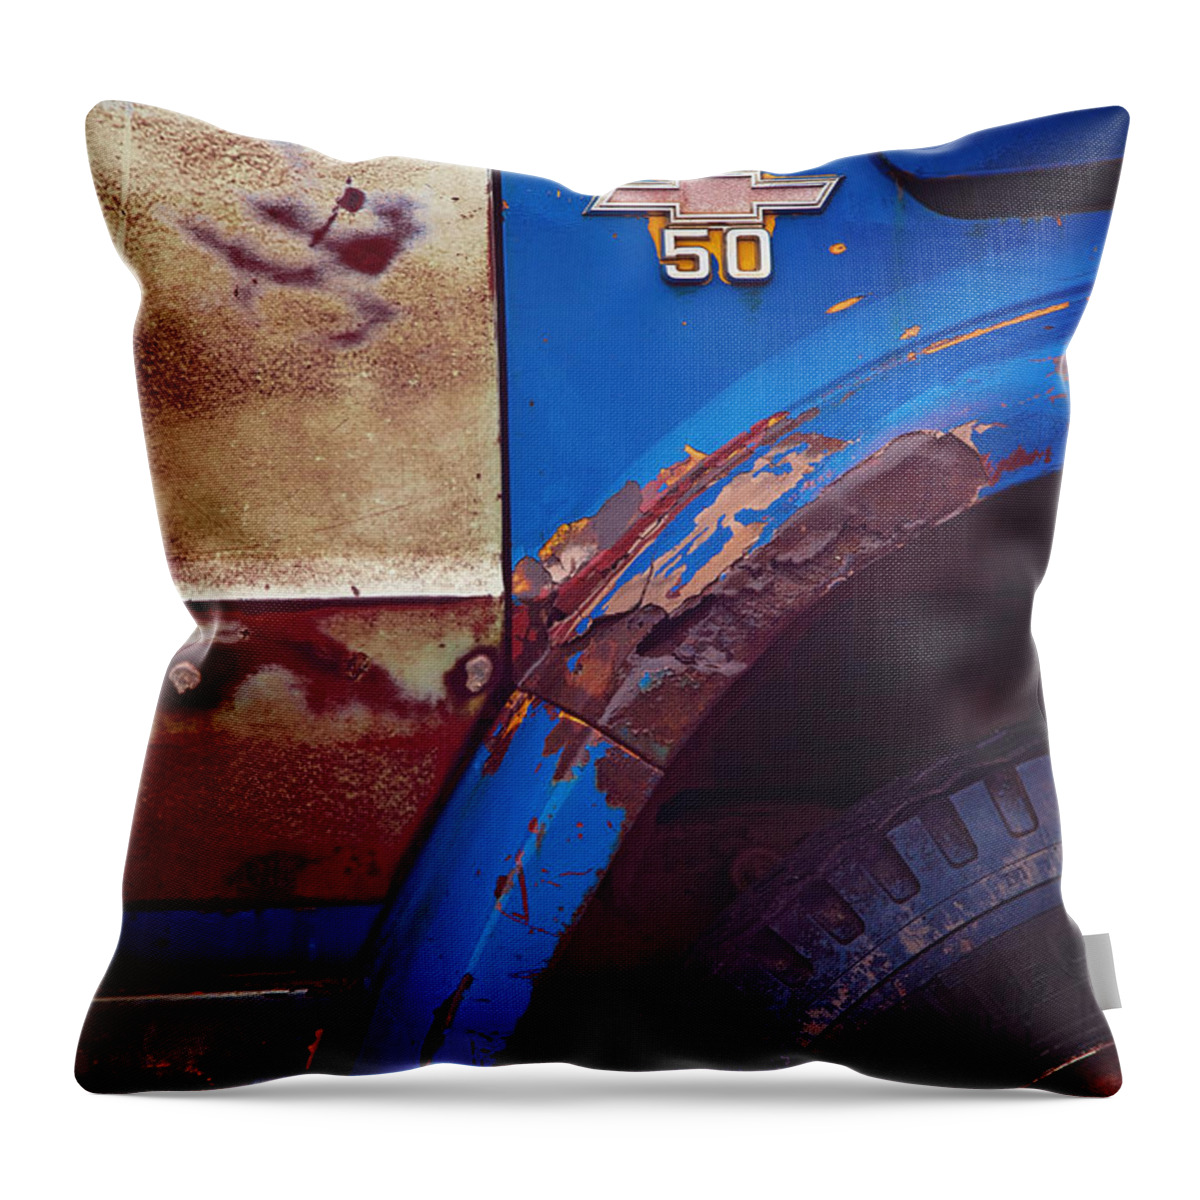 Vintage Throw Pillow featuring the photograph Chevy by Toni Hopper